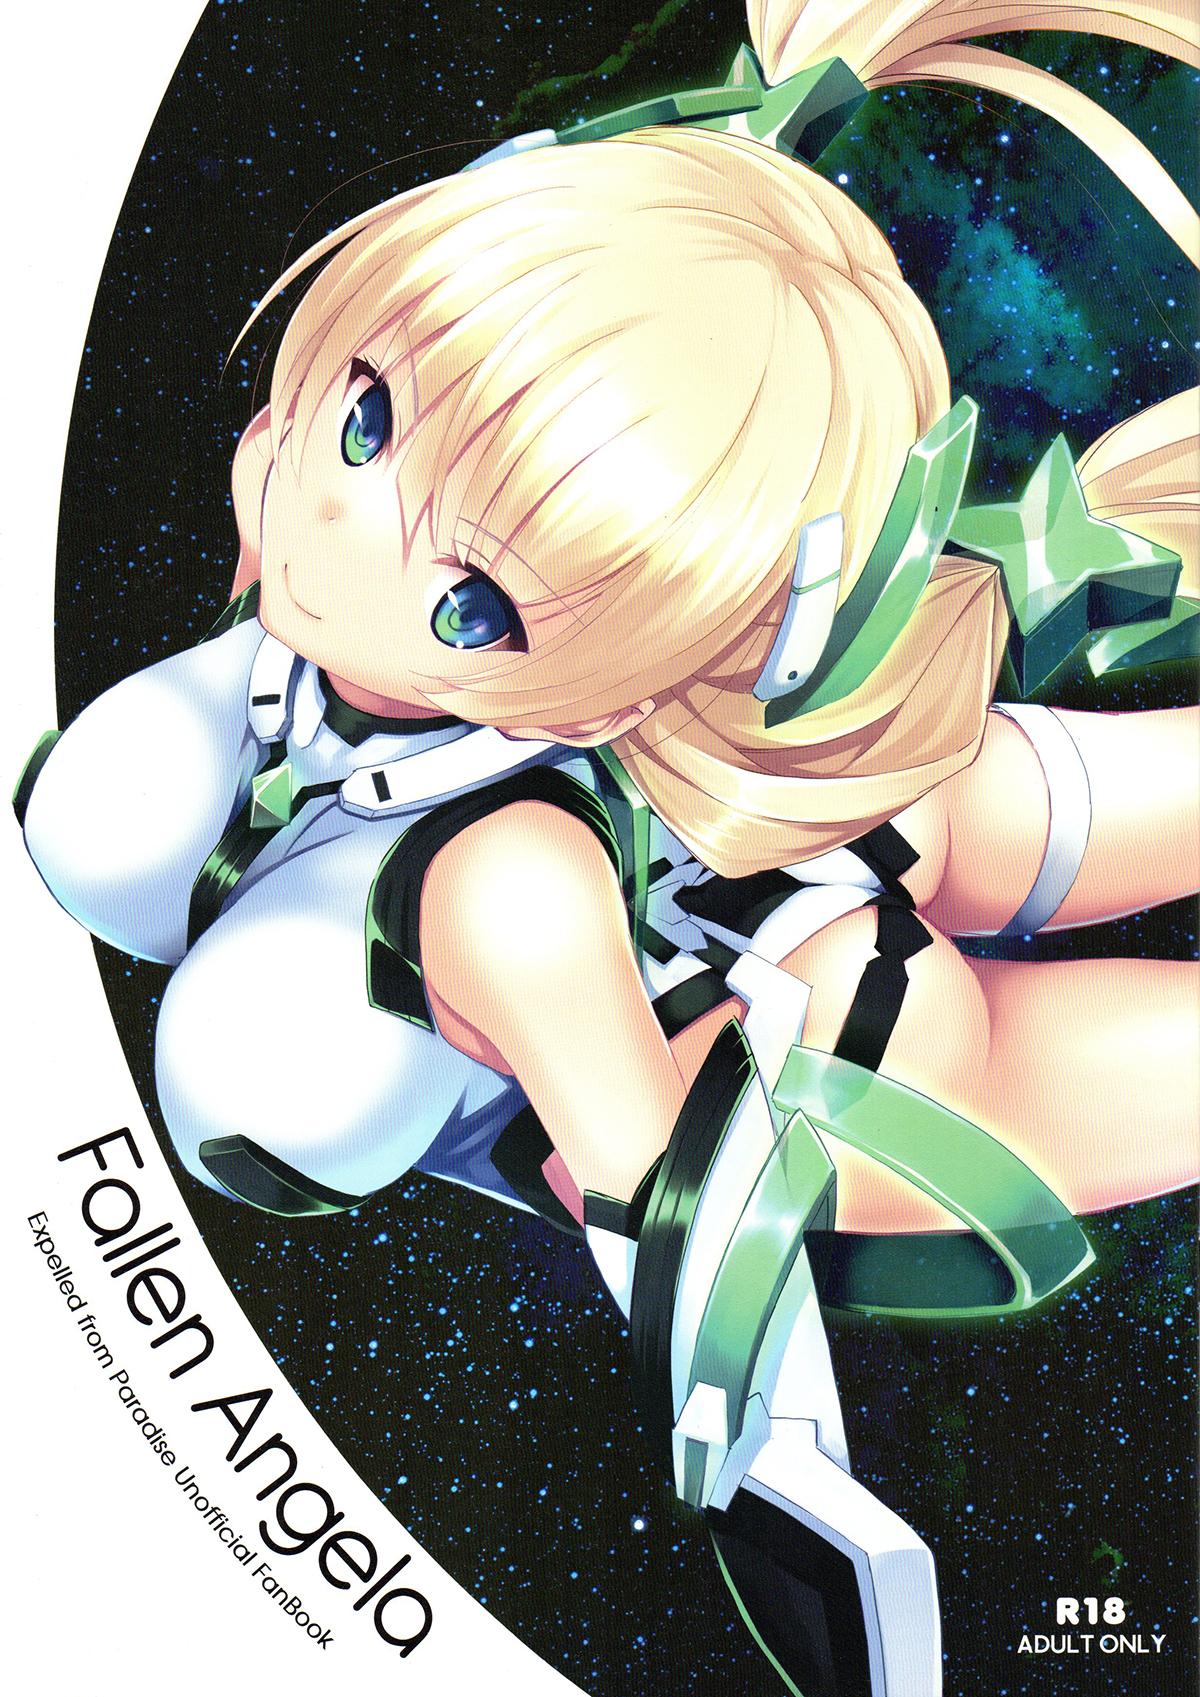 Gilf Fallen Angela - Expelled from paradise Teenie - Picture 1